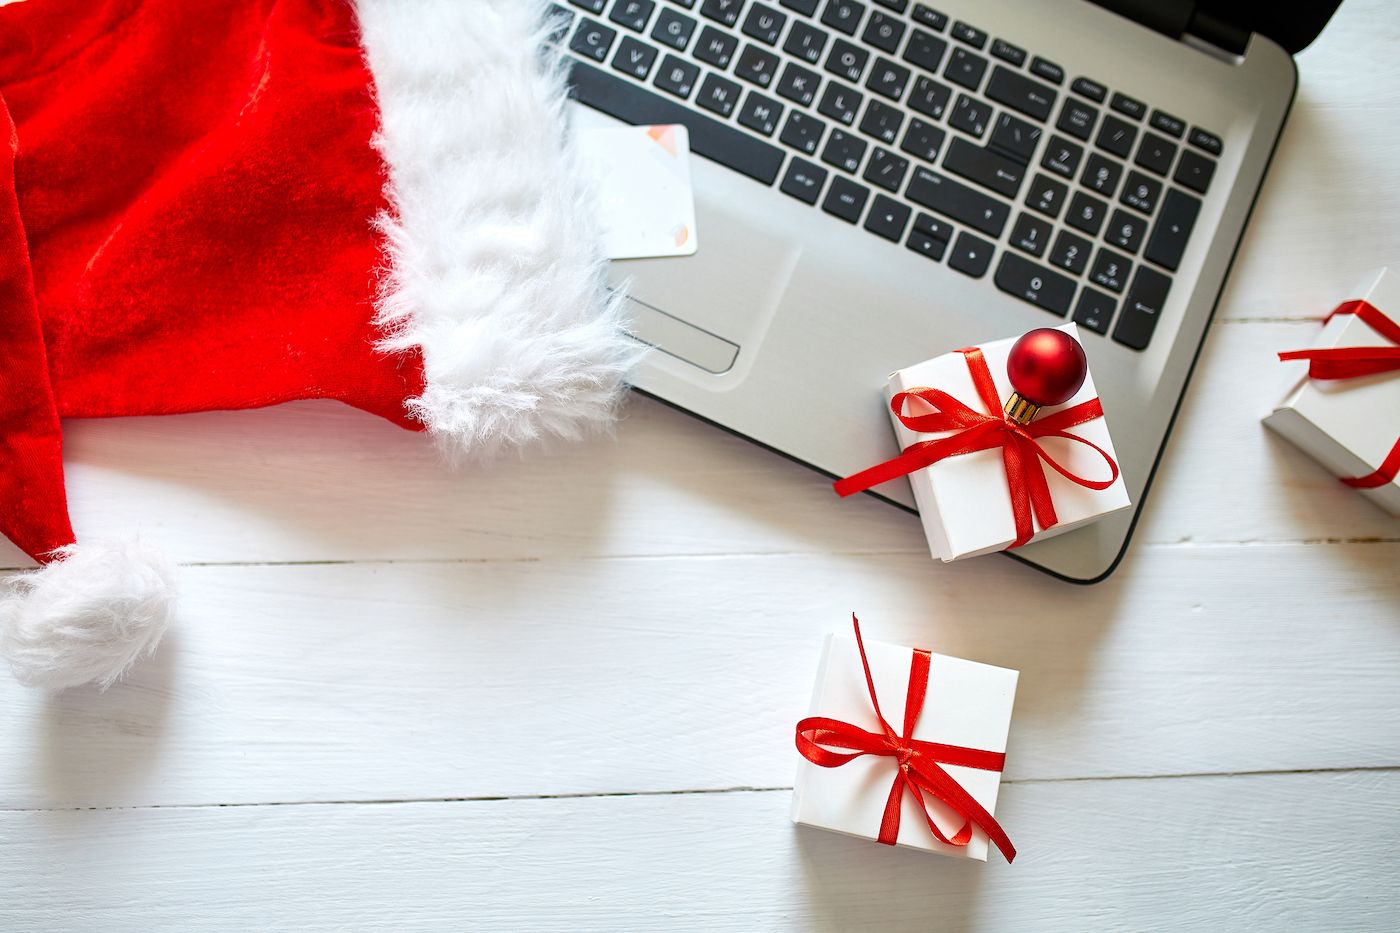 Sharing the Gifts of Cybersecurity – Or, a Lesson From My First Year Without Santa